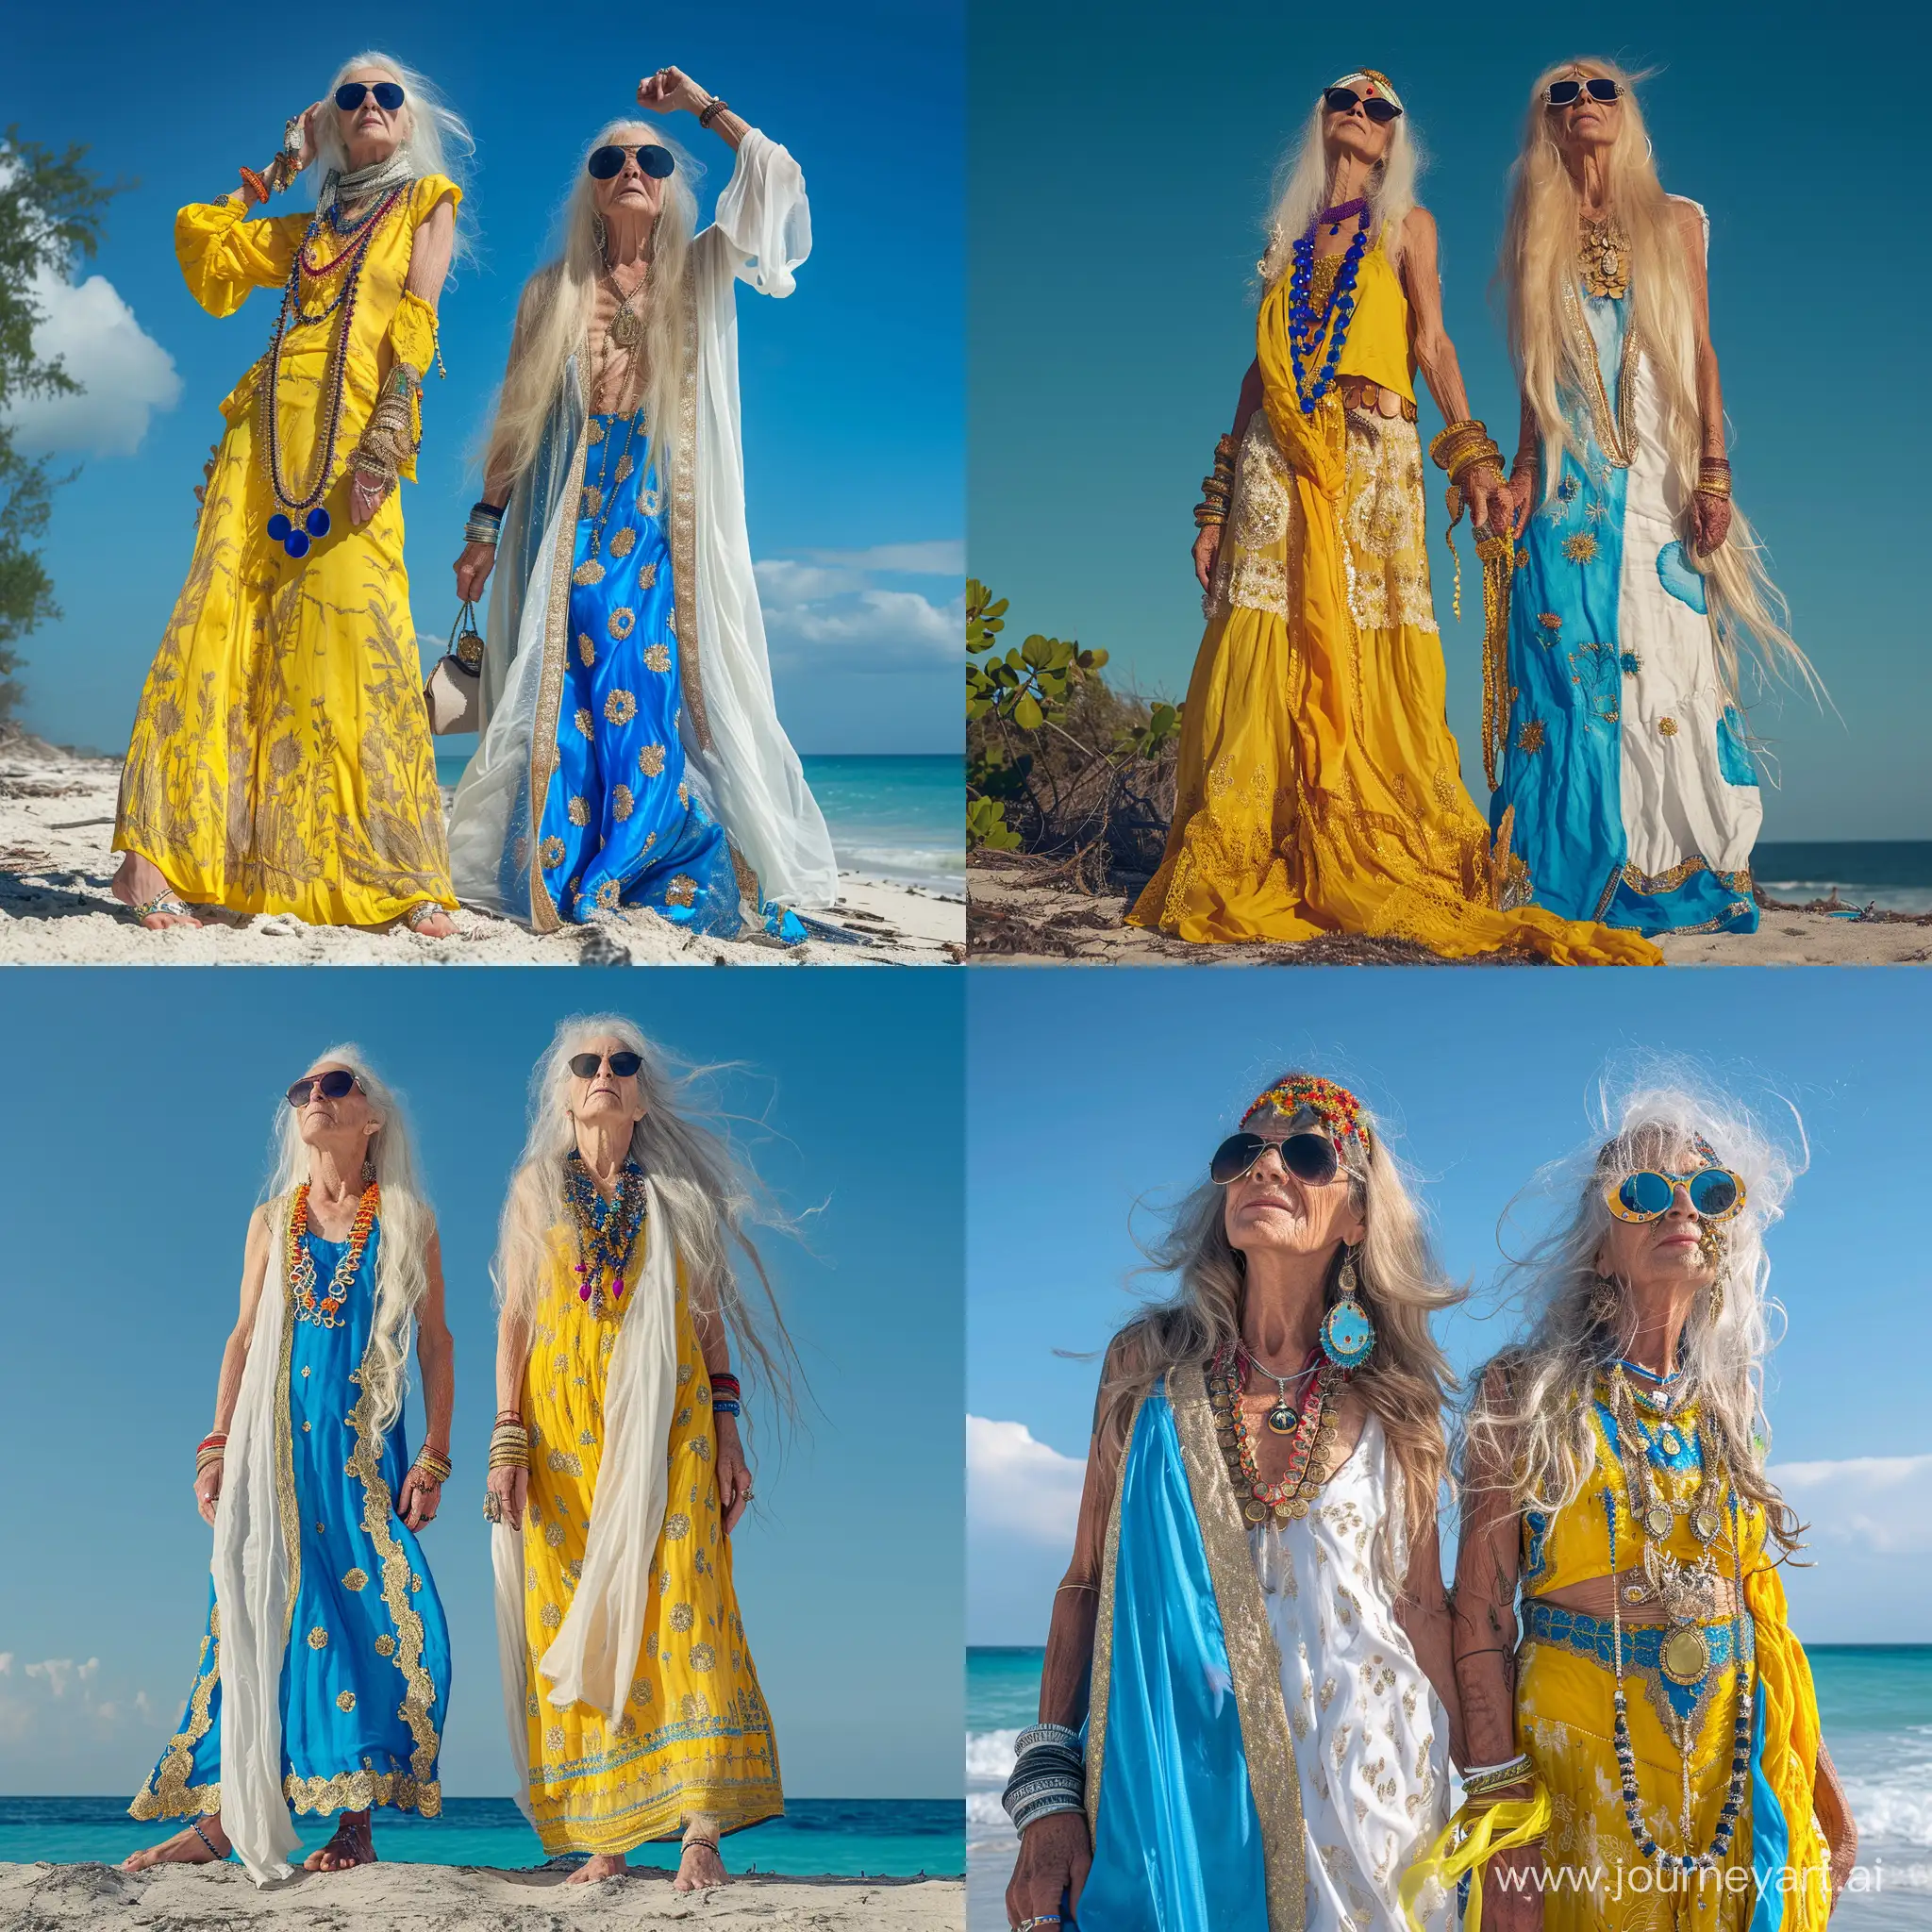   to  80 years old skiny hippies ladys colorfull  wild long hair  old fashion sunglasses  yellow in india dress bleu whit gold    standing at the beach and   sky  bleu  fotorealistisch 50mm fuji xt2 low angle